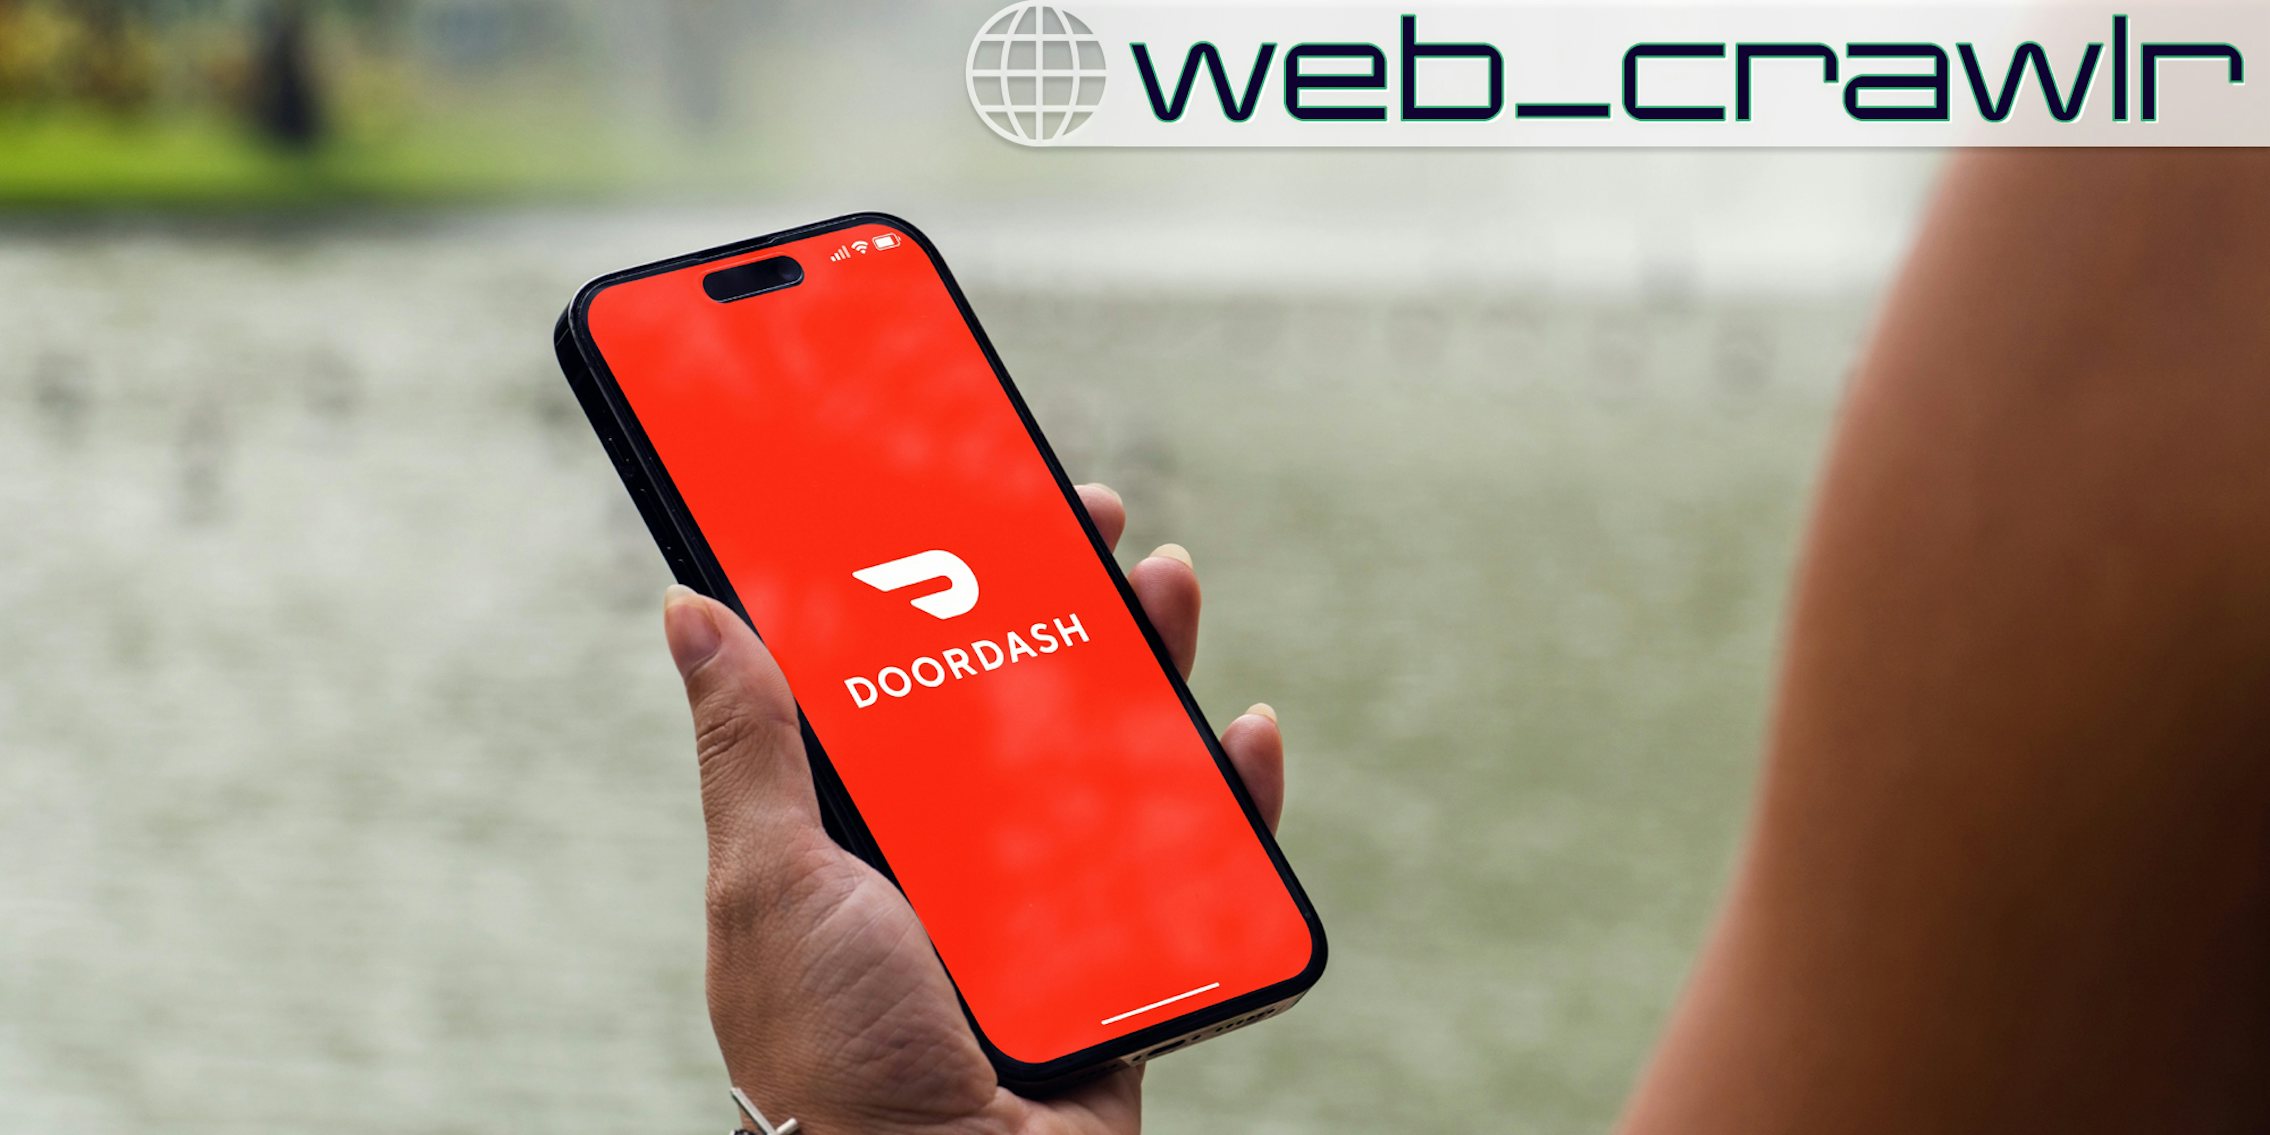 A person holding a phone with the DoorDash logo on it. The Daily Dot newsletter web_crawlr logo is in the top right corner.